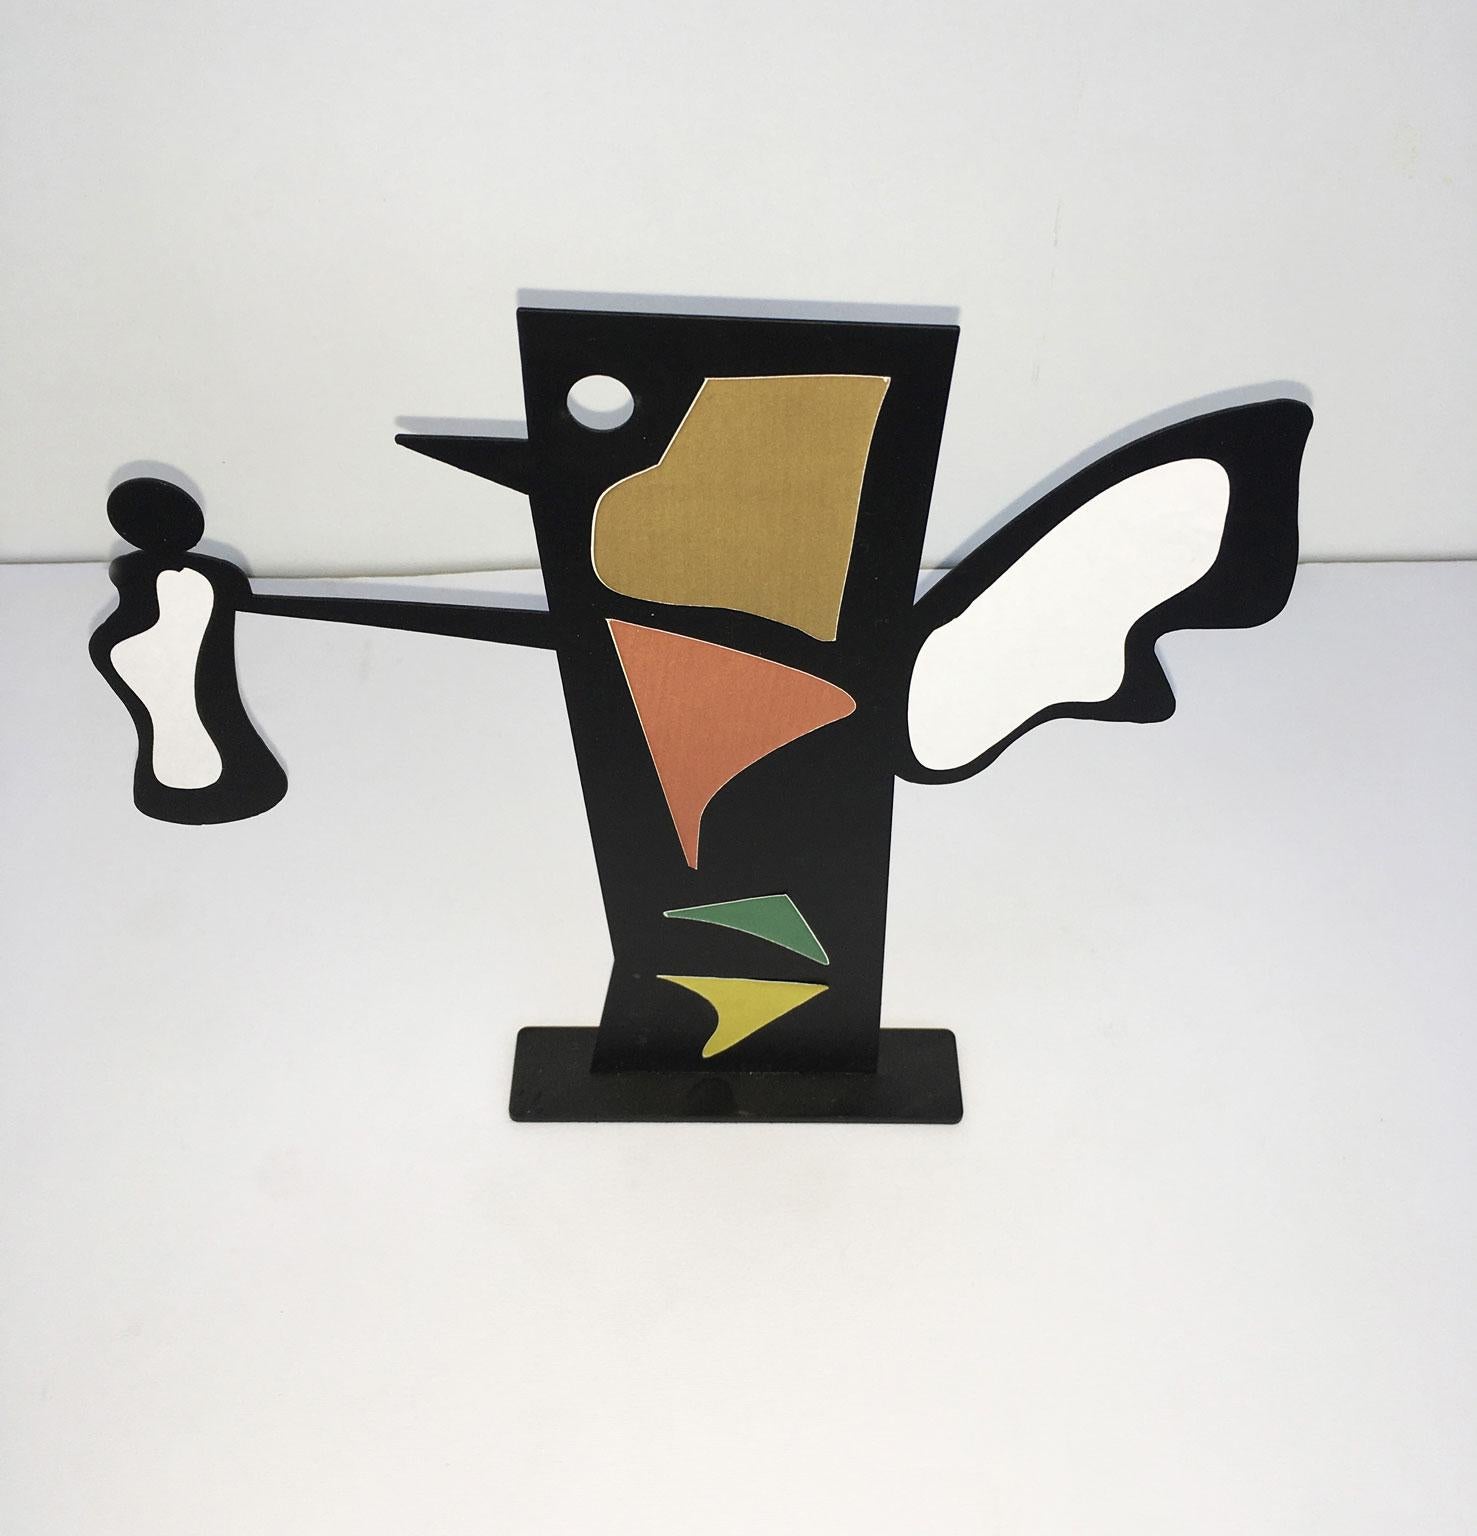 Italy 1980 Riccardo Dalisi Black Metal Painted Sculpture Caffellatte For Sale 3